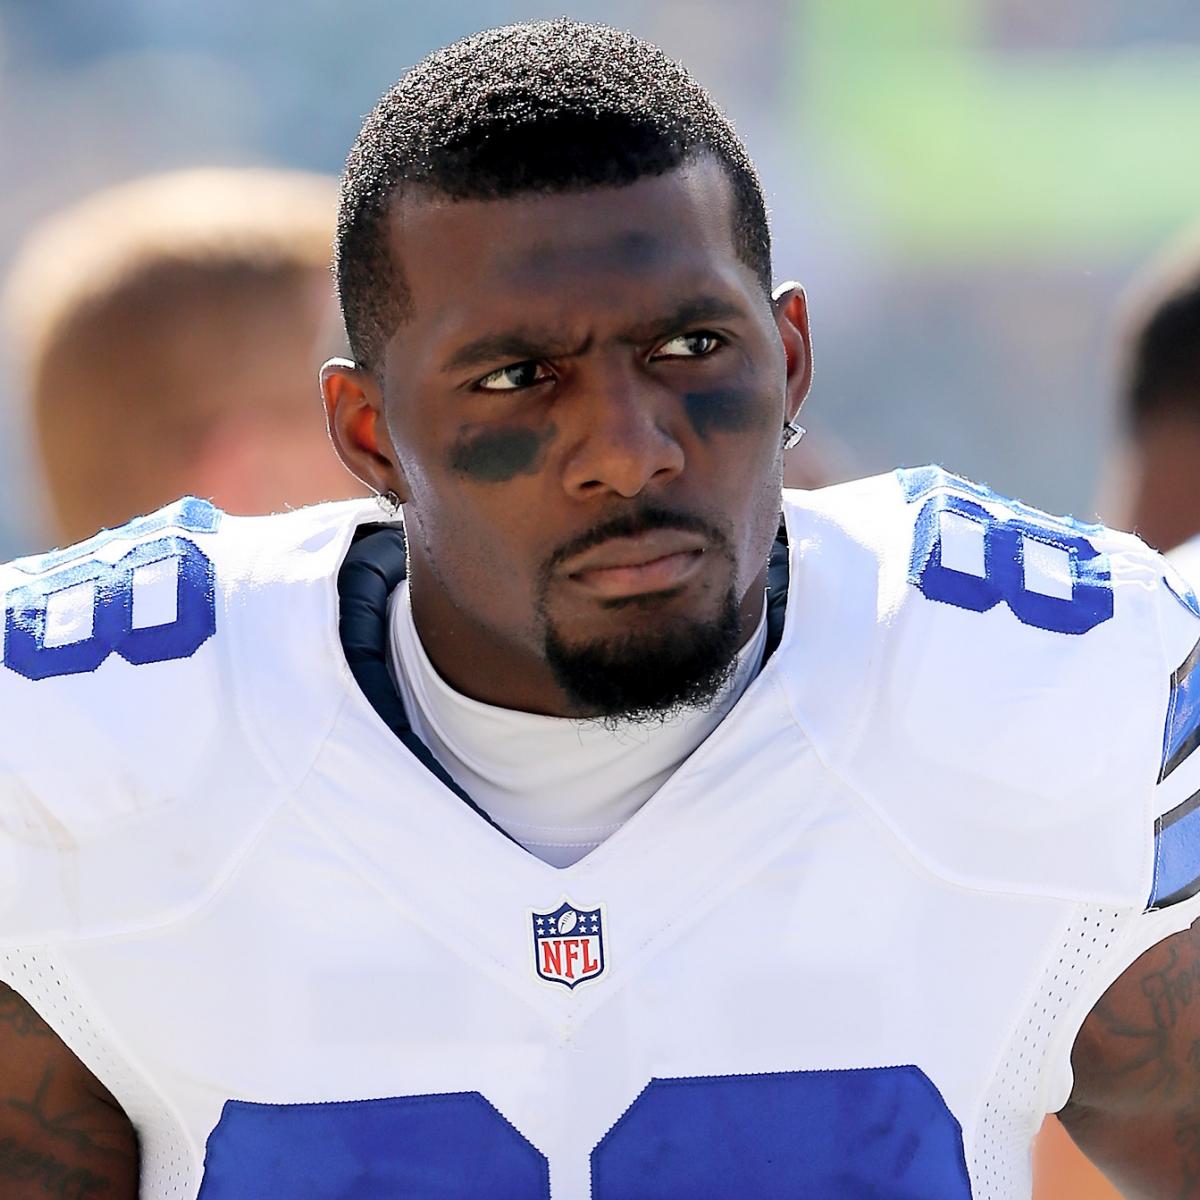 Dez Bryant Is Excited to Take on the Cowboys – With No Hard Feelings